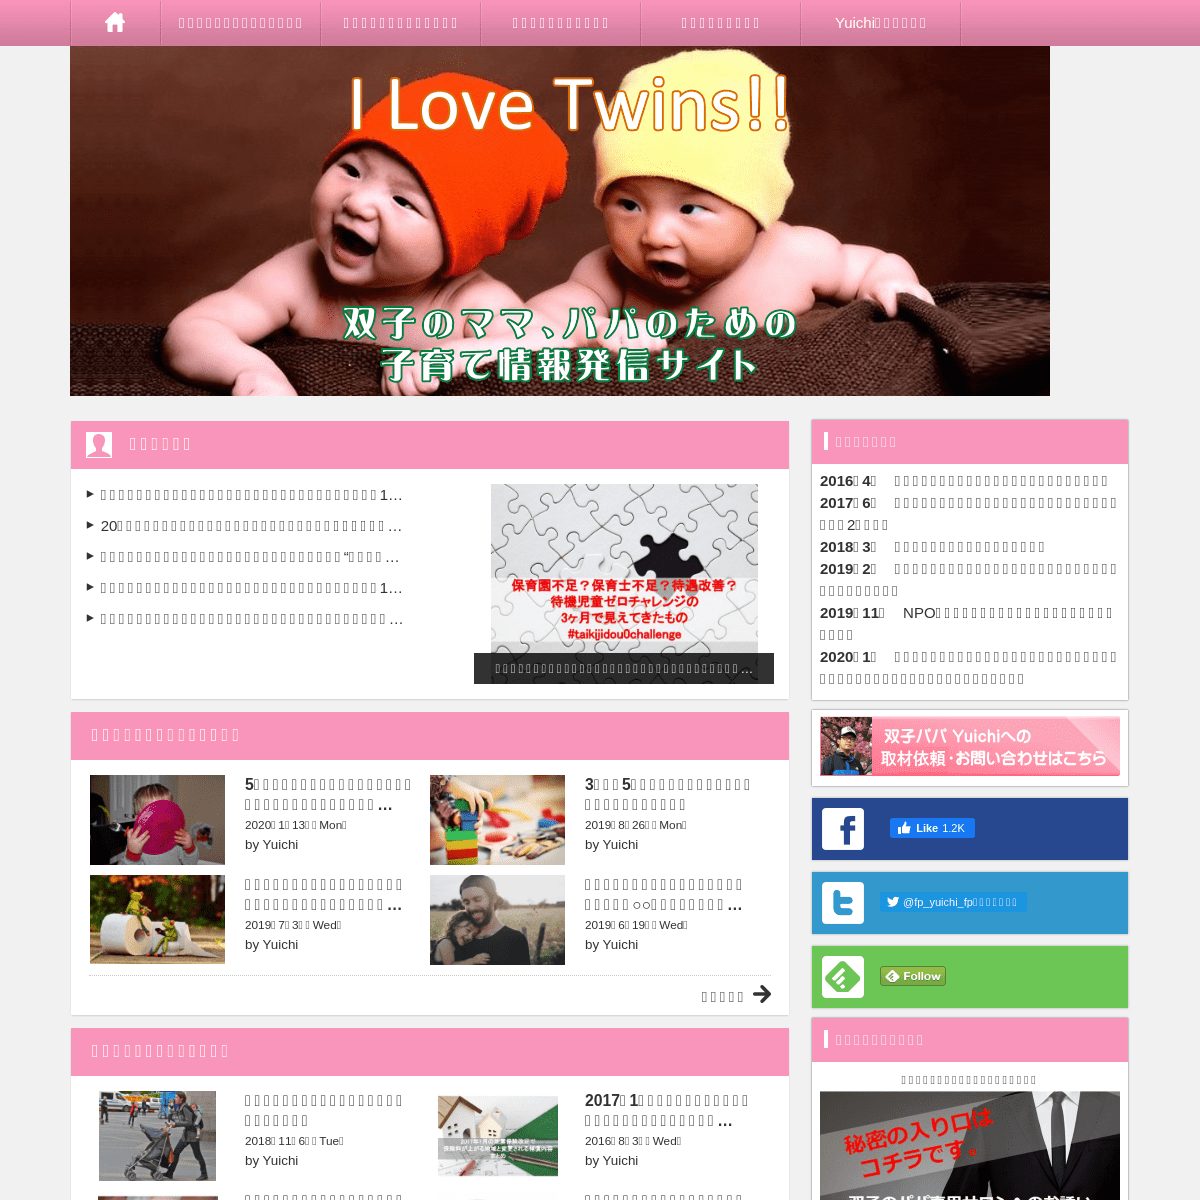 A complete backup of happy-twinslife.com